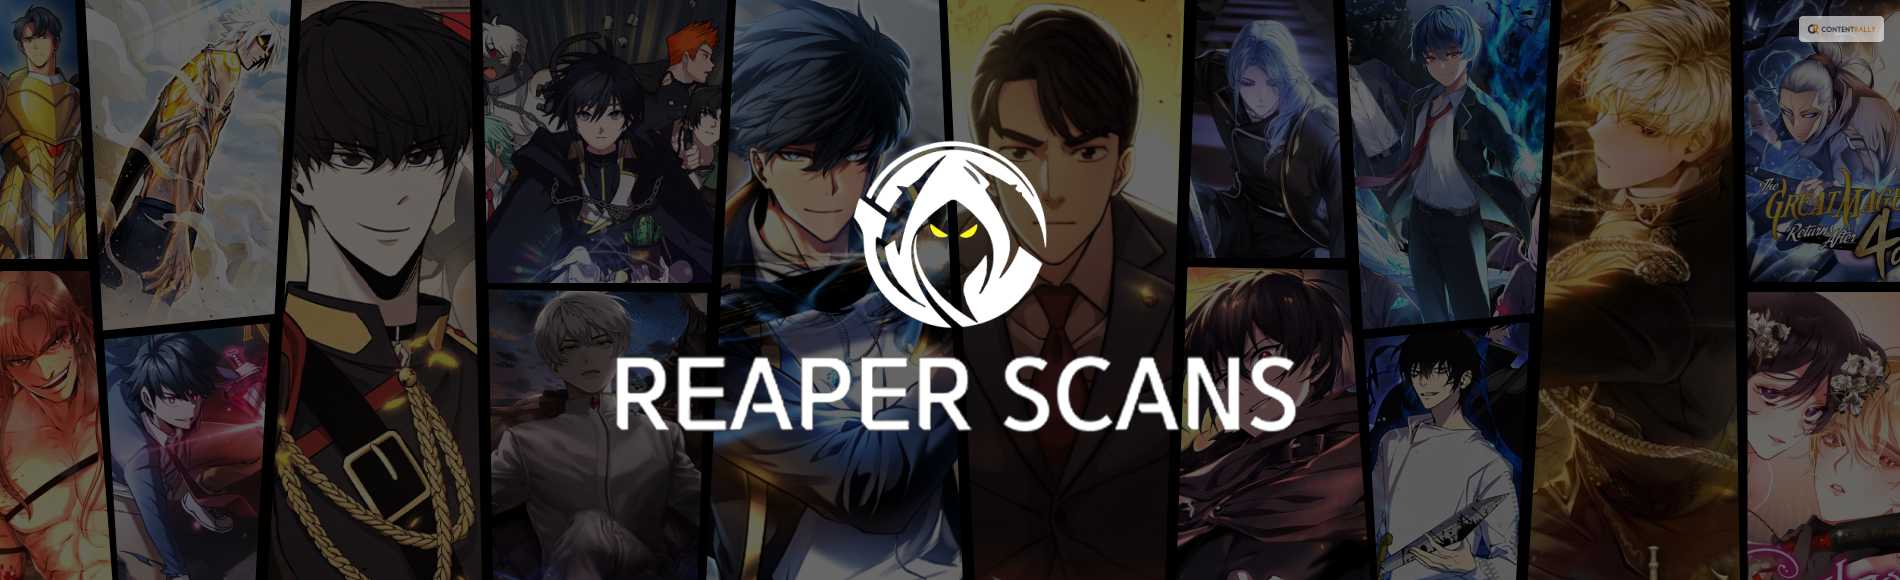 What Is Reaperscans? Is It Illegal? How To Find Comics On It?